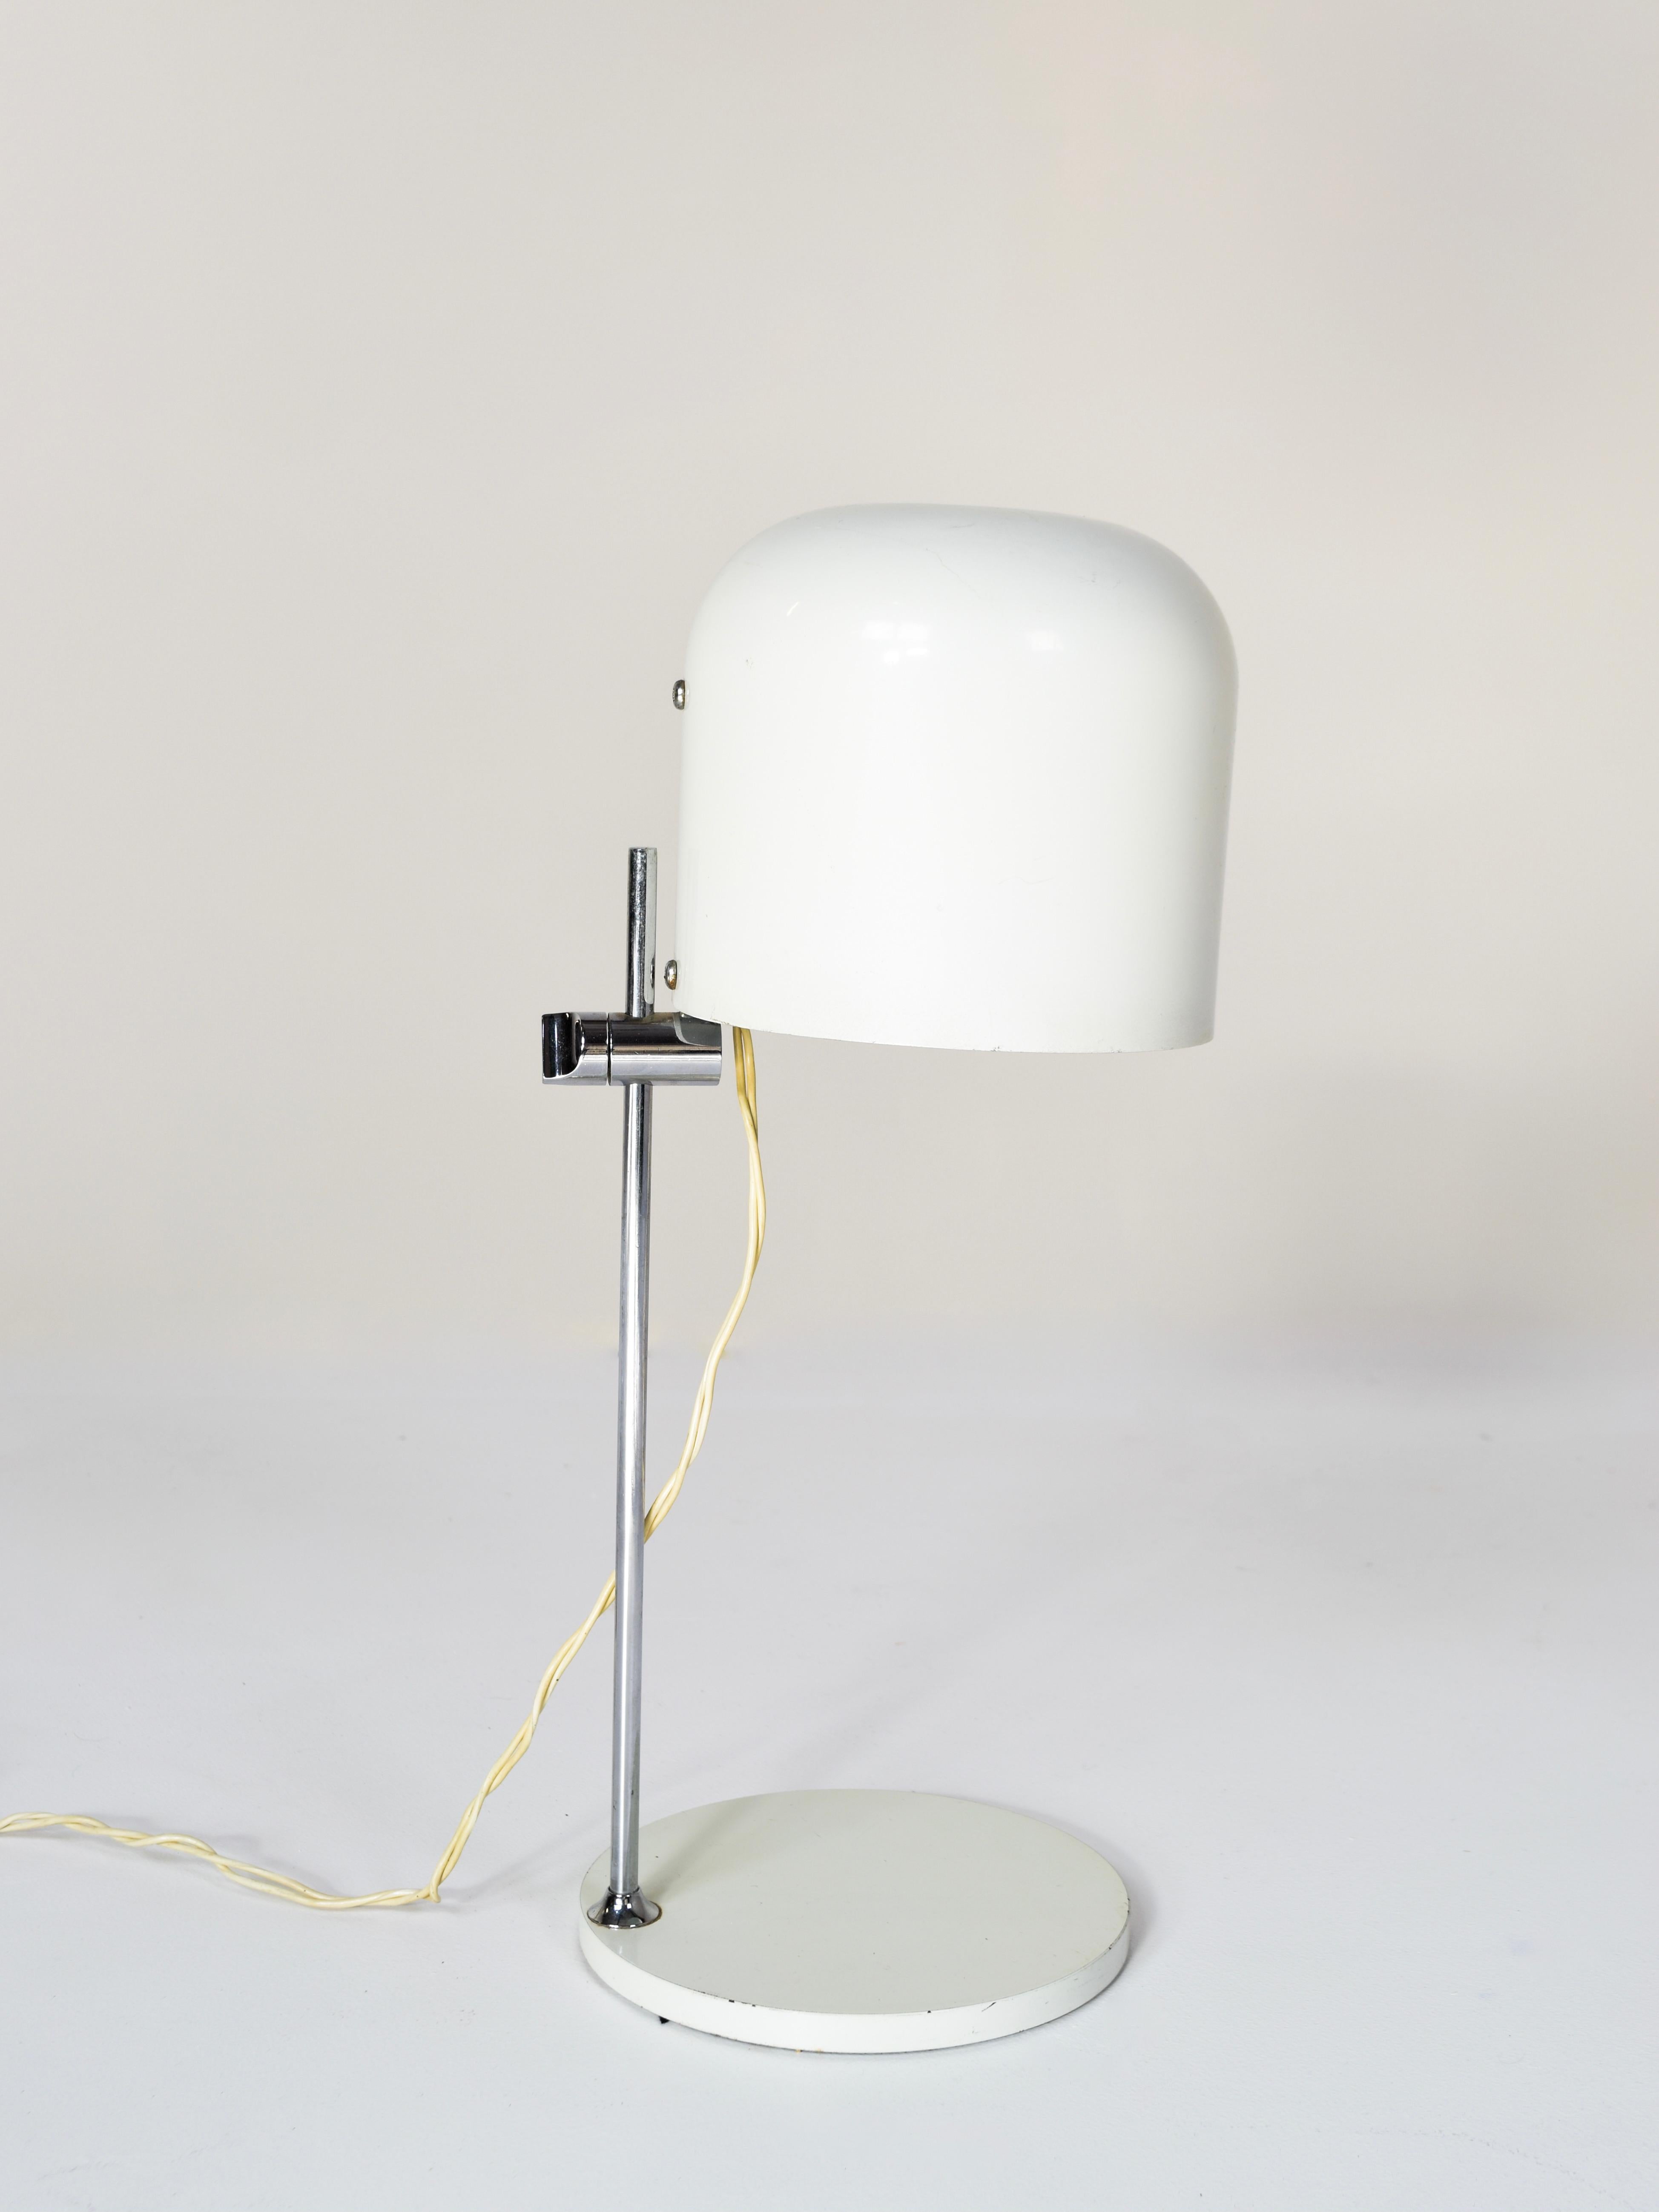 Rare Metalarte table lamp by André Ricard, Spain, 1960s. This lamp is in height adjustable and the lampshade can be turned. The lamp is white with a metal foot and a white base, all in metal. It has a Minimalist and modern design and is signed on